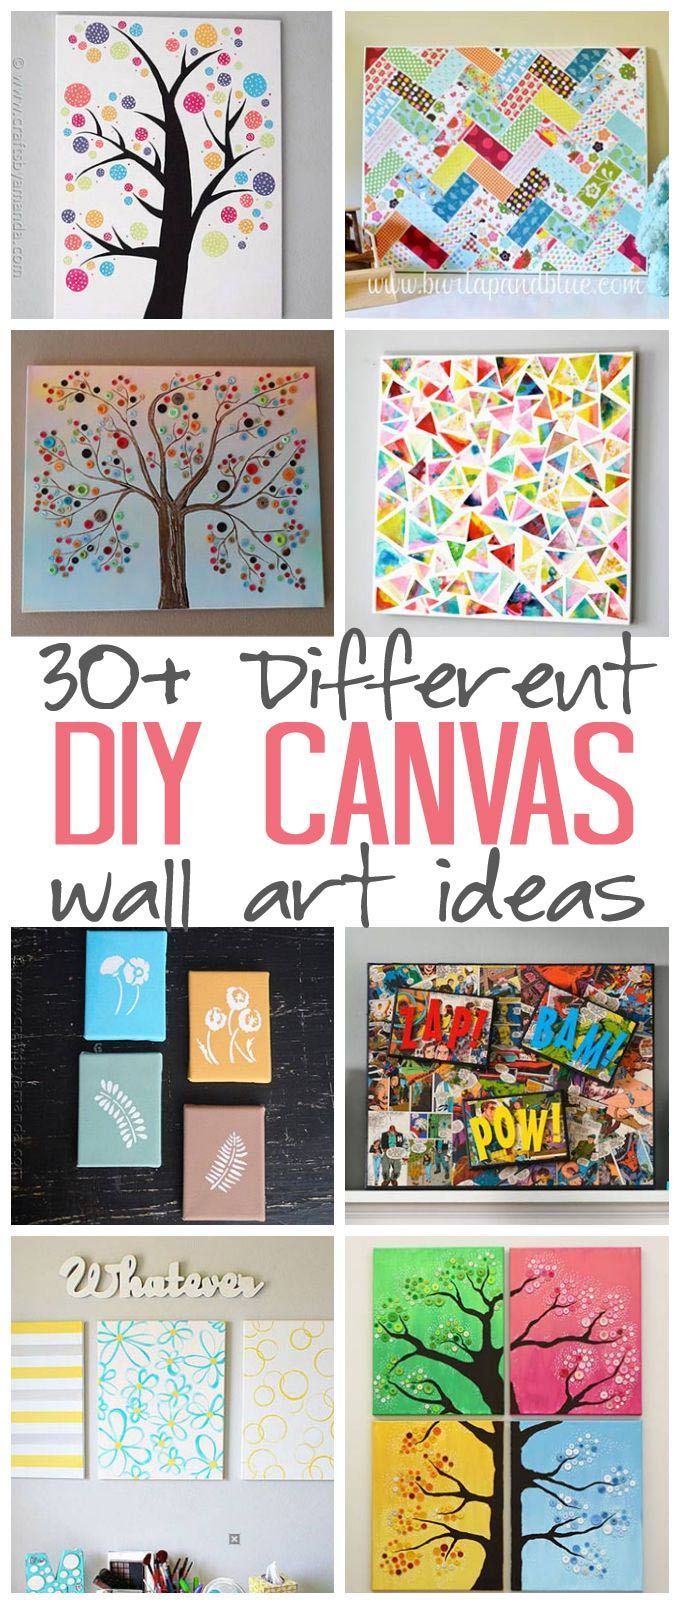 DIY Canvas Wall Art Ideas: 30+ canvas tutorials for adults – great ideas for your home, office, nursery and craft room!